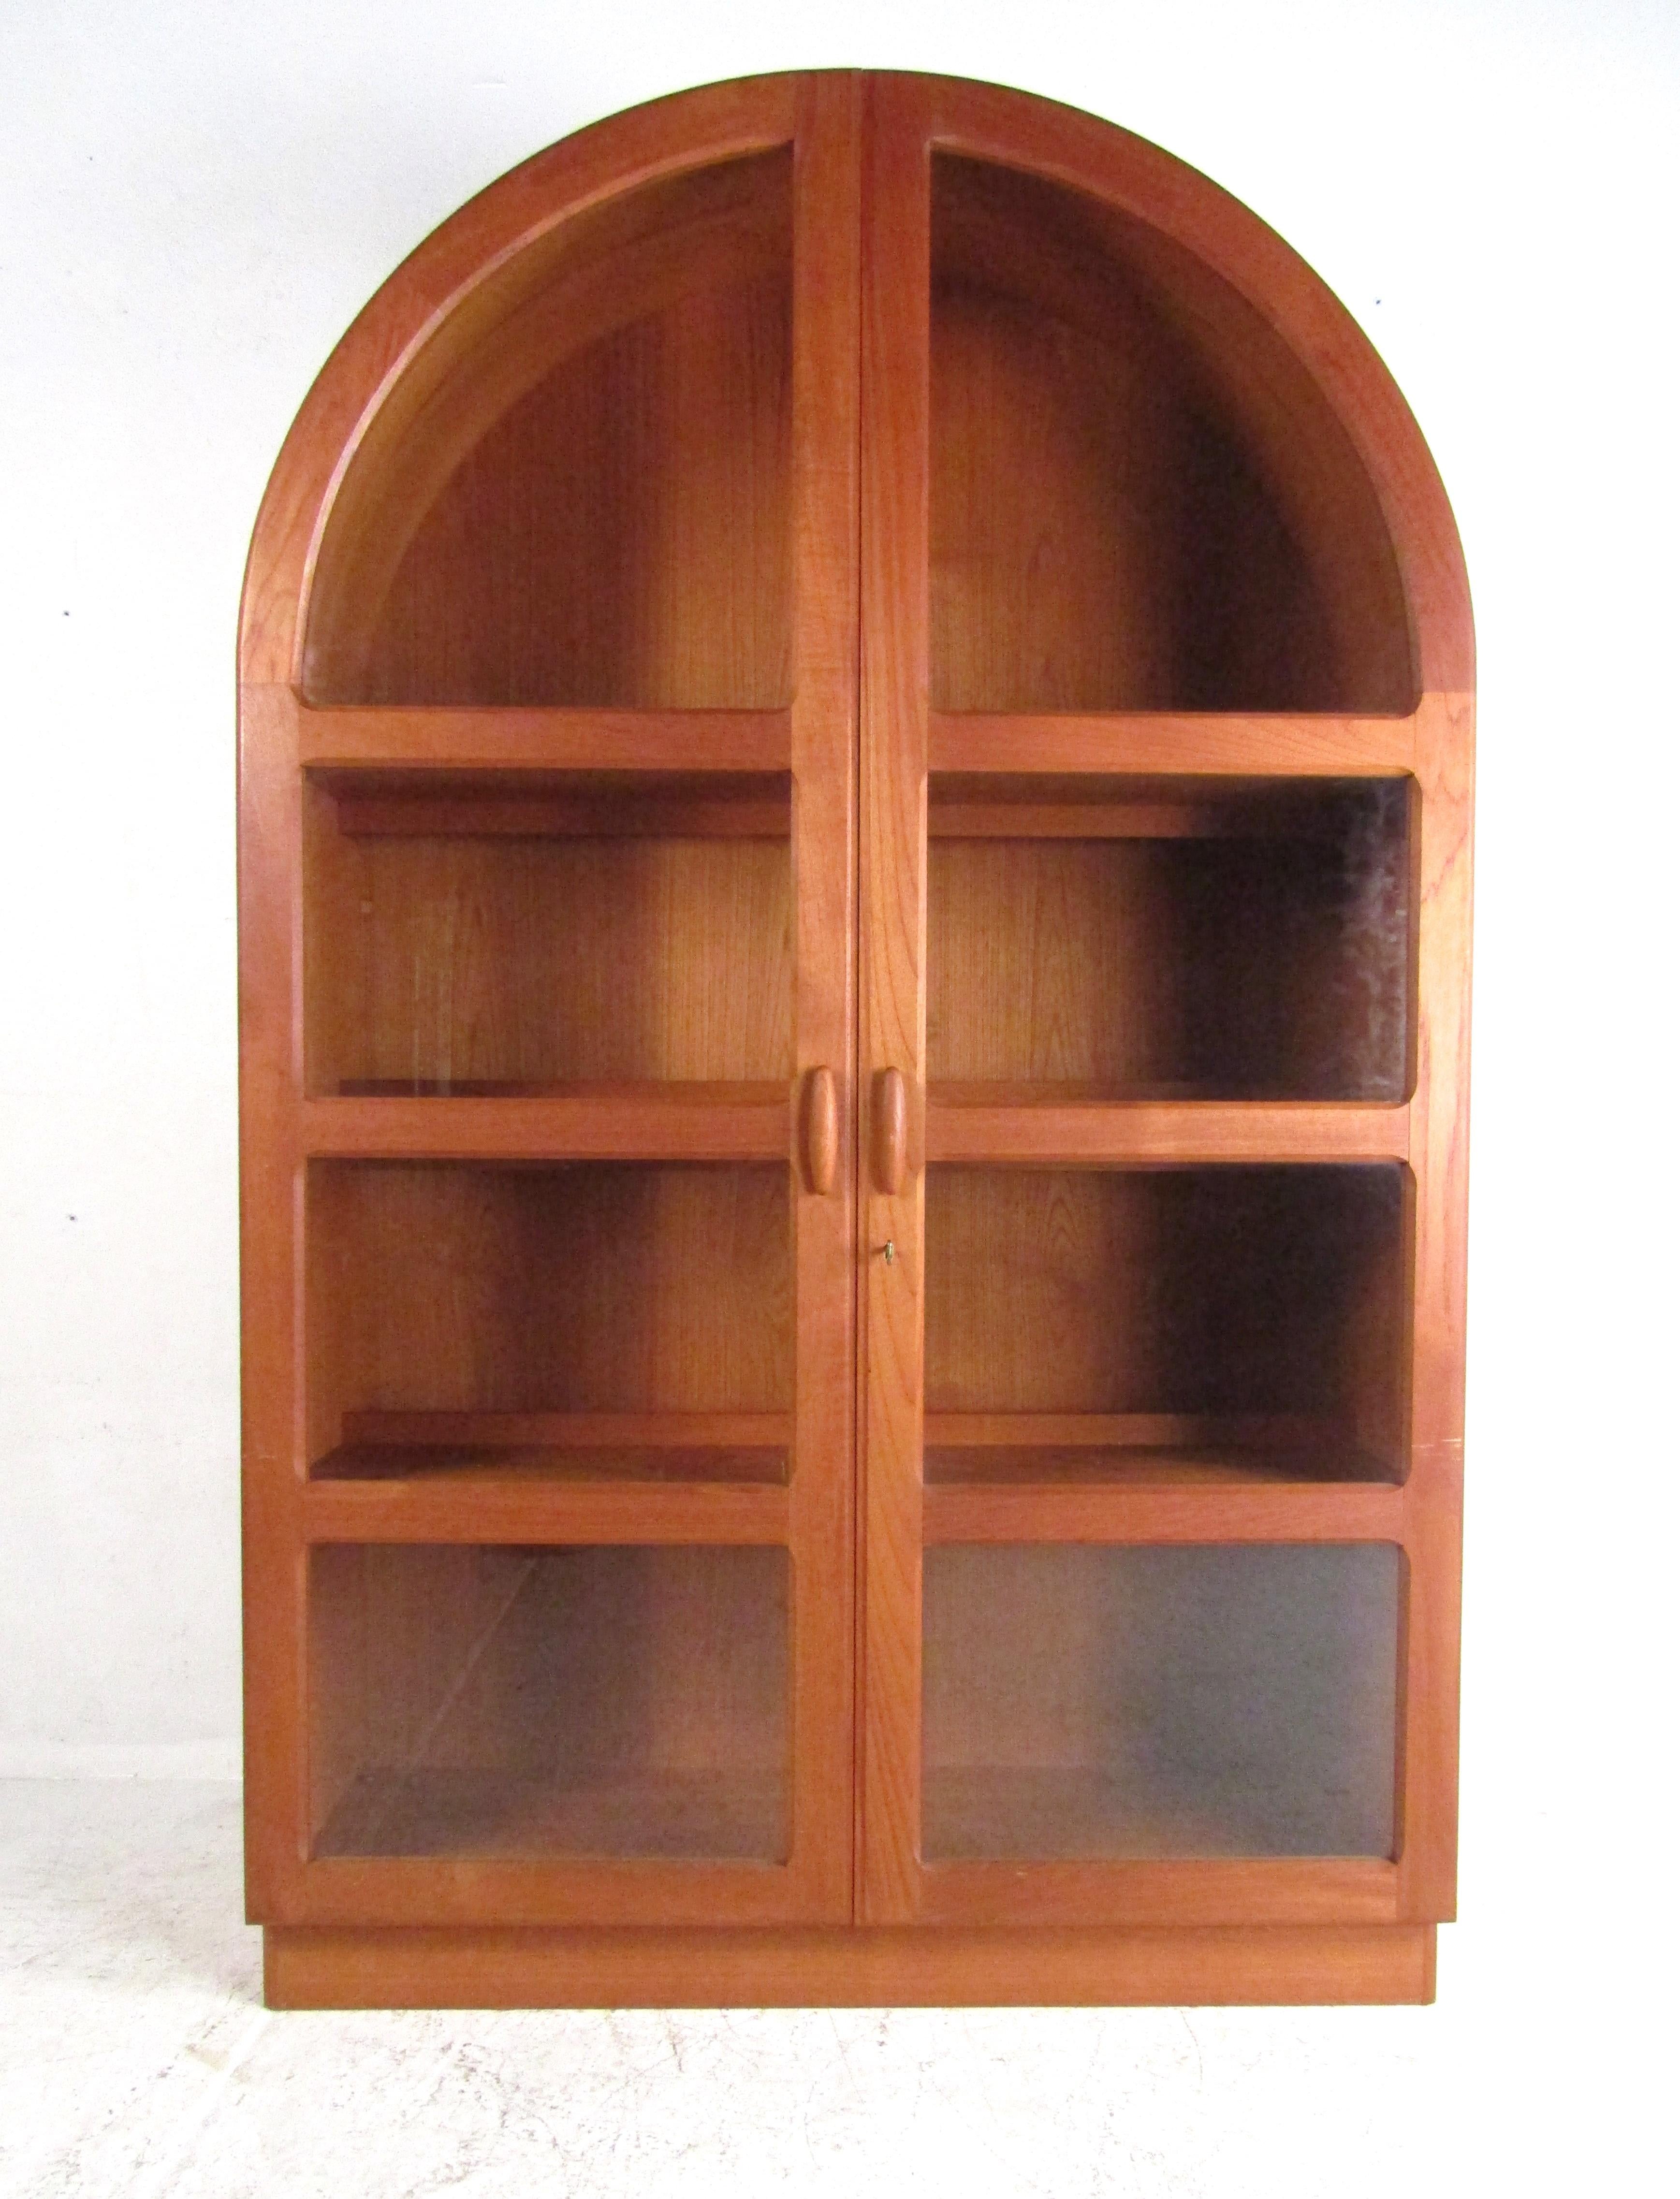 This impressive vintage modern teak wardrobe/armoire features a unique arched top with two large cabinet doors that open to unveil four teak wood shelves. A wonderful Danish design that ensures plenty of room for storage and makes for an ideal space